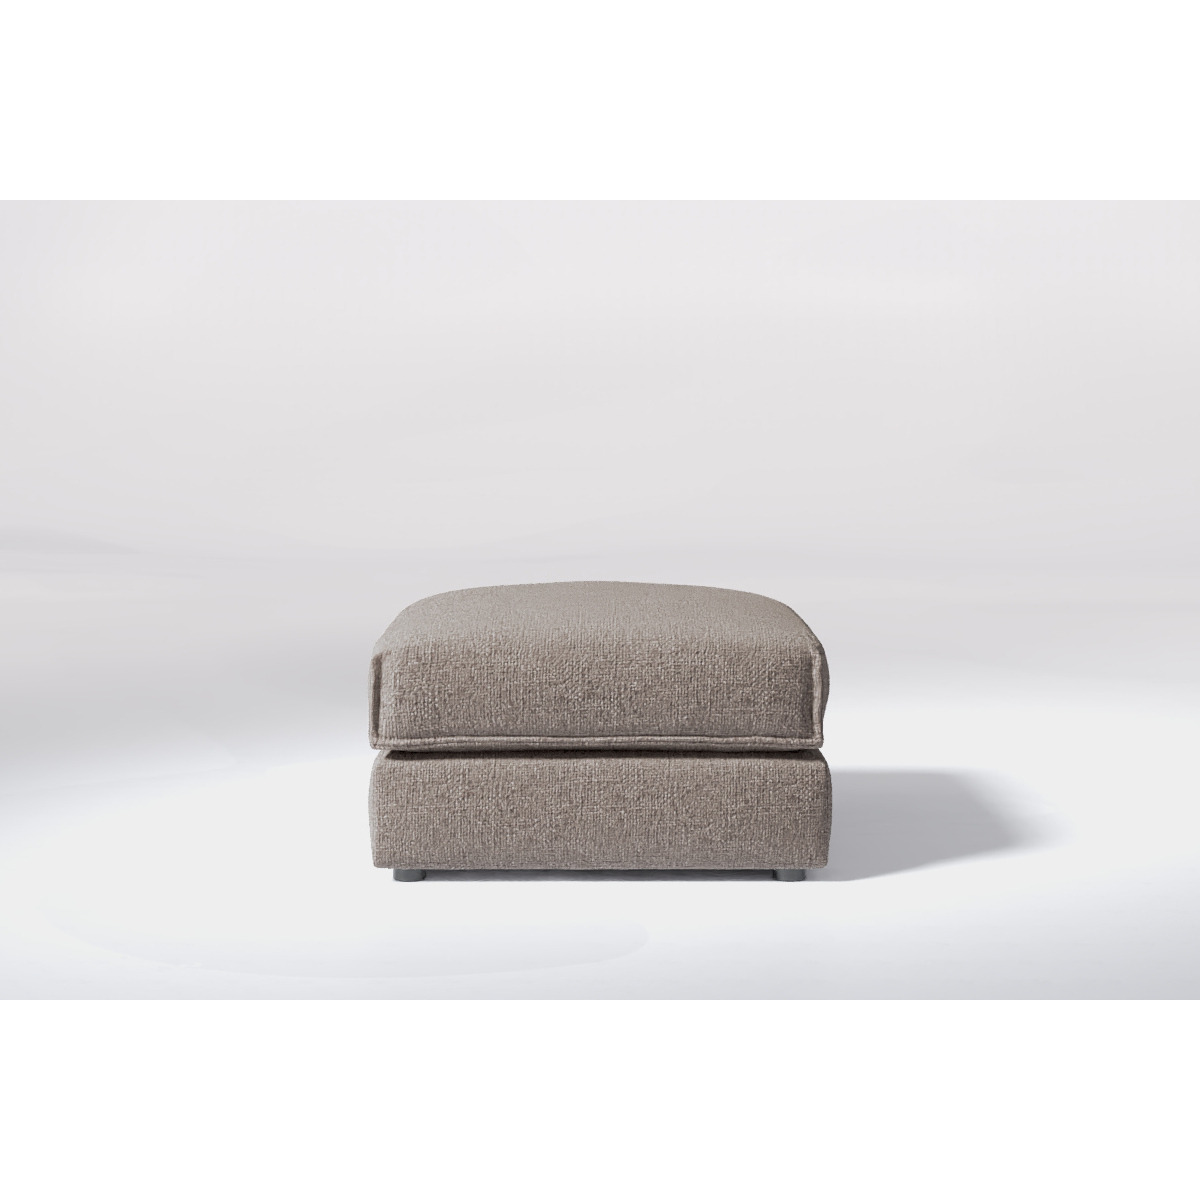 Dove Grey Chunky Textured Weave Large Footstool with Storage